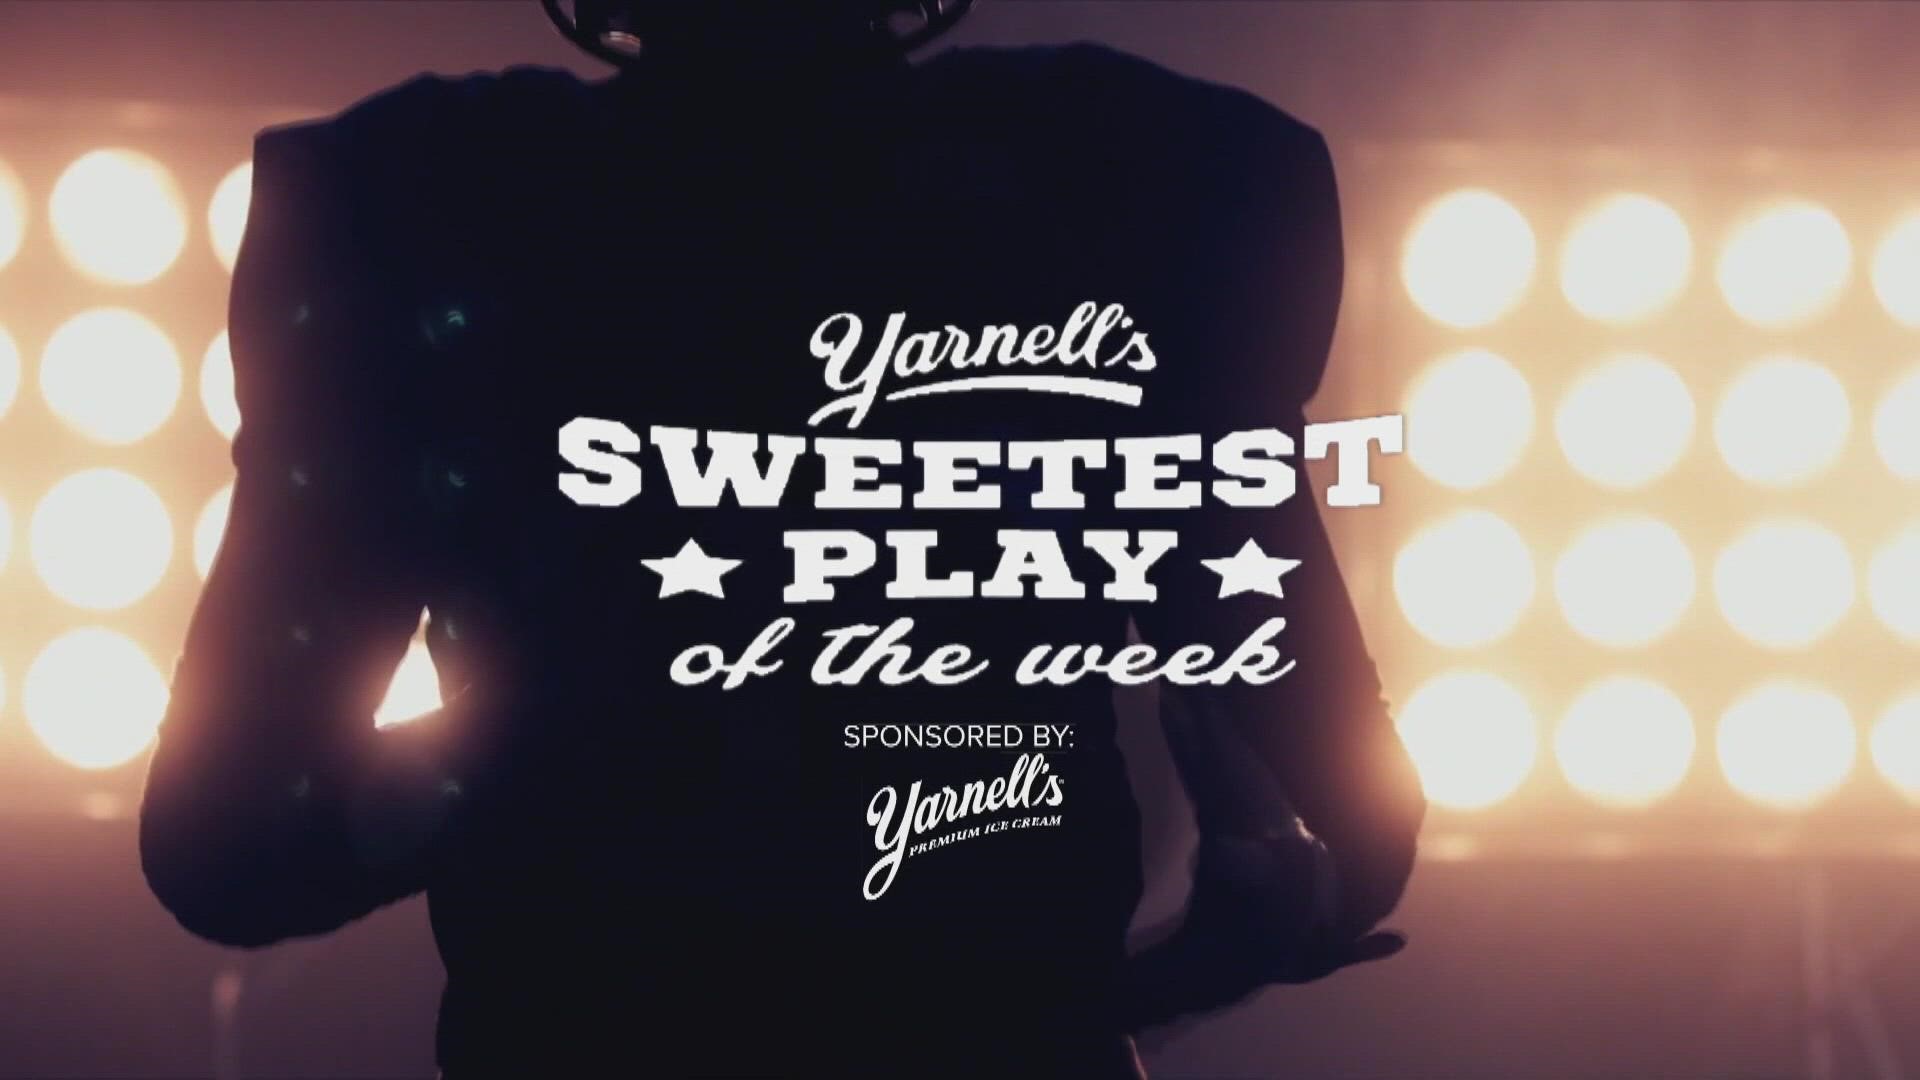 Yarnell's Sweetest Play is back! Vote for your favorite plays here!